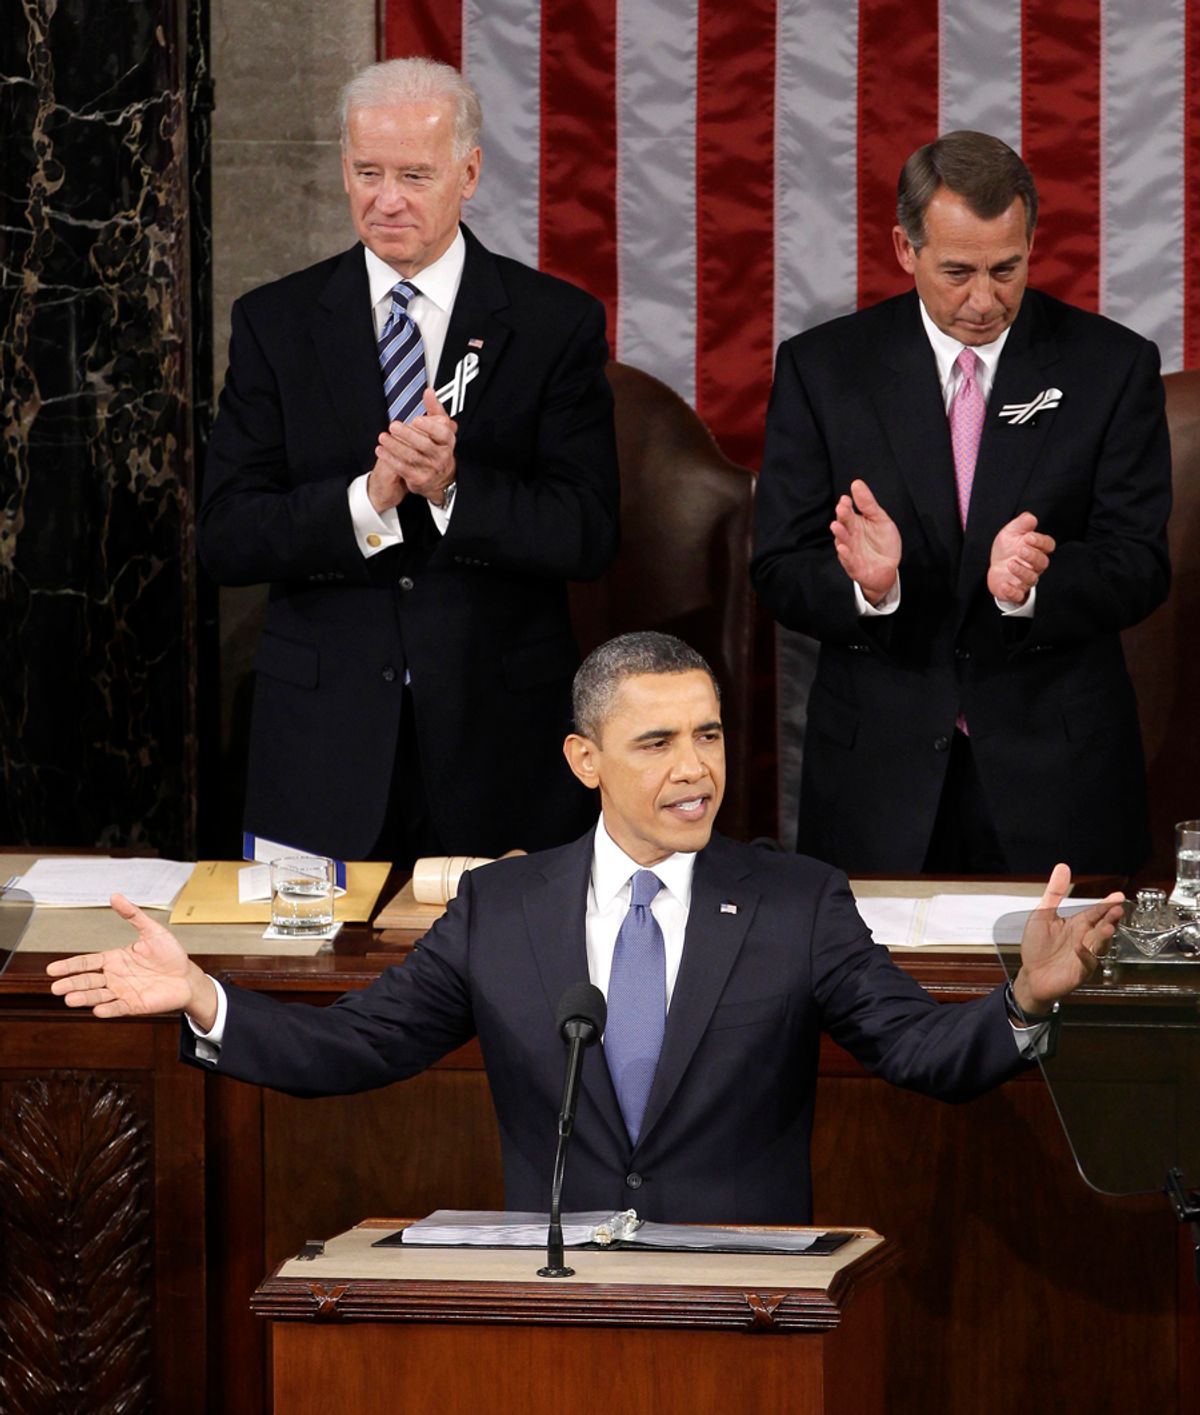 President Barack Obama gestures on Capitol Hill in Washington, Tuesday, Jan. 25, 2011, prior to delivering his State of the Union address in Washington, Tuesday, Jan. 25, 2011. Vice President Joe Biden and House Speaker John Boehner of Ohio applaud at rear. (AP Photo/Charles Dharapak) (Charles Dharapak)